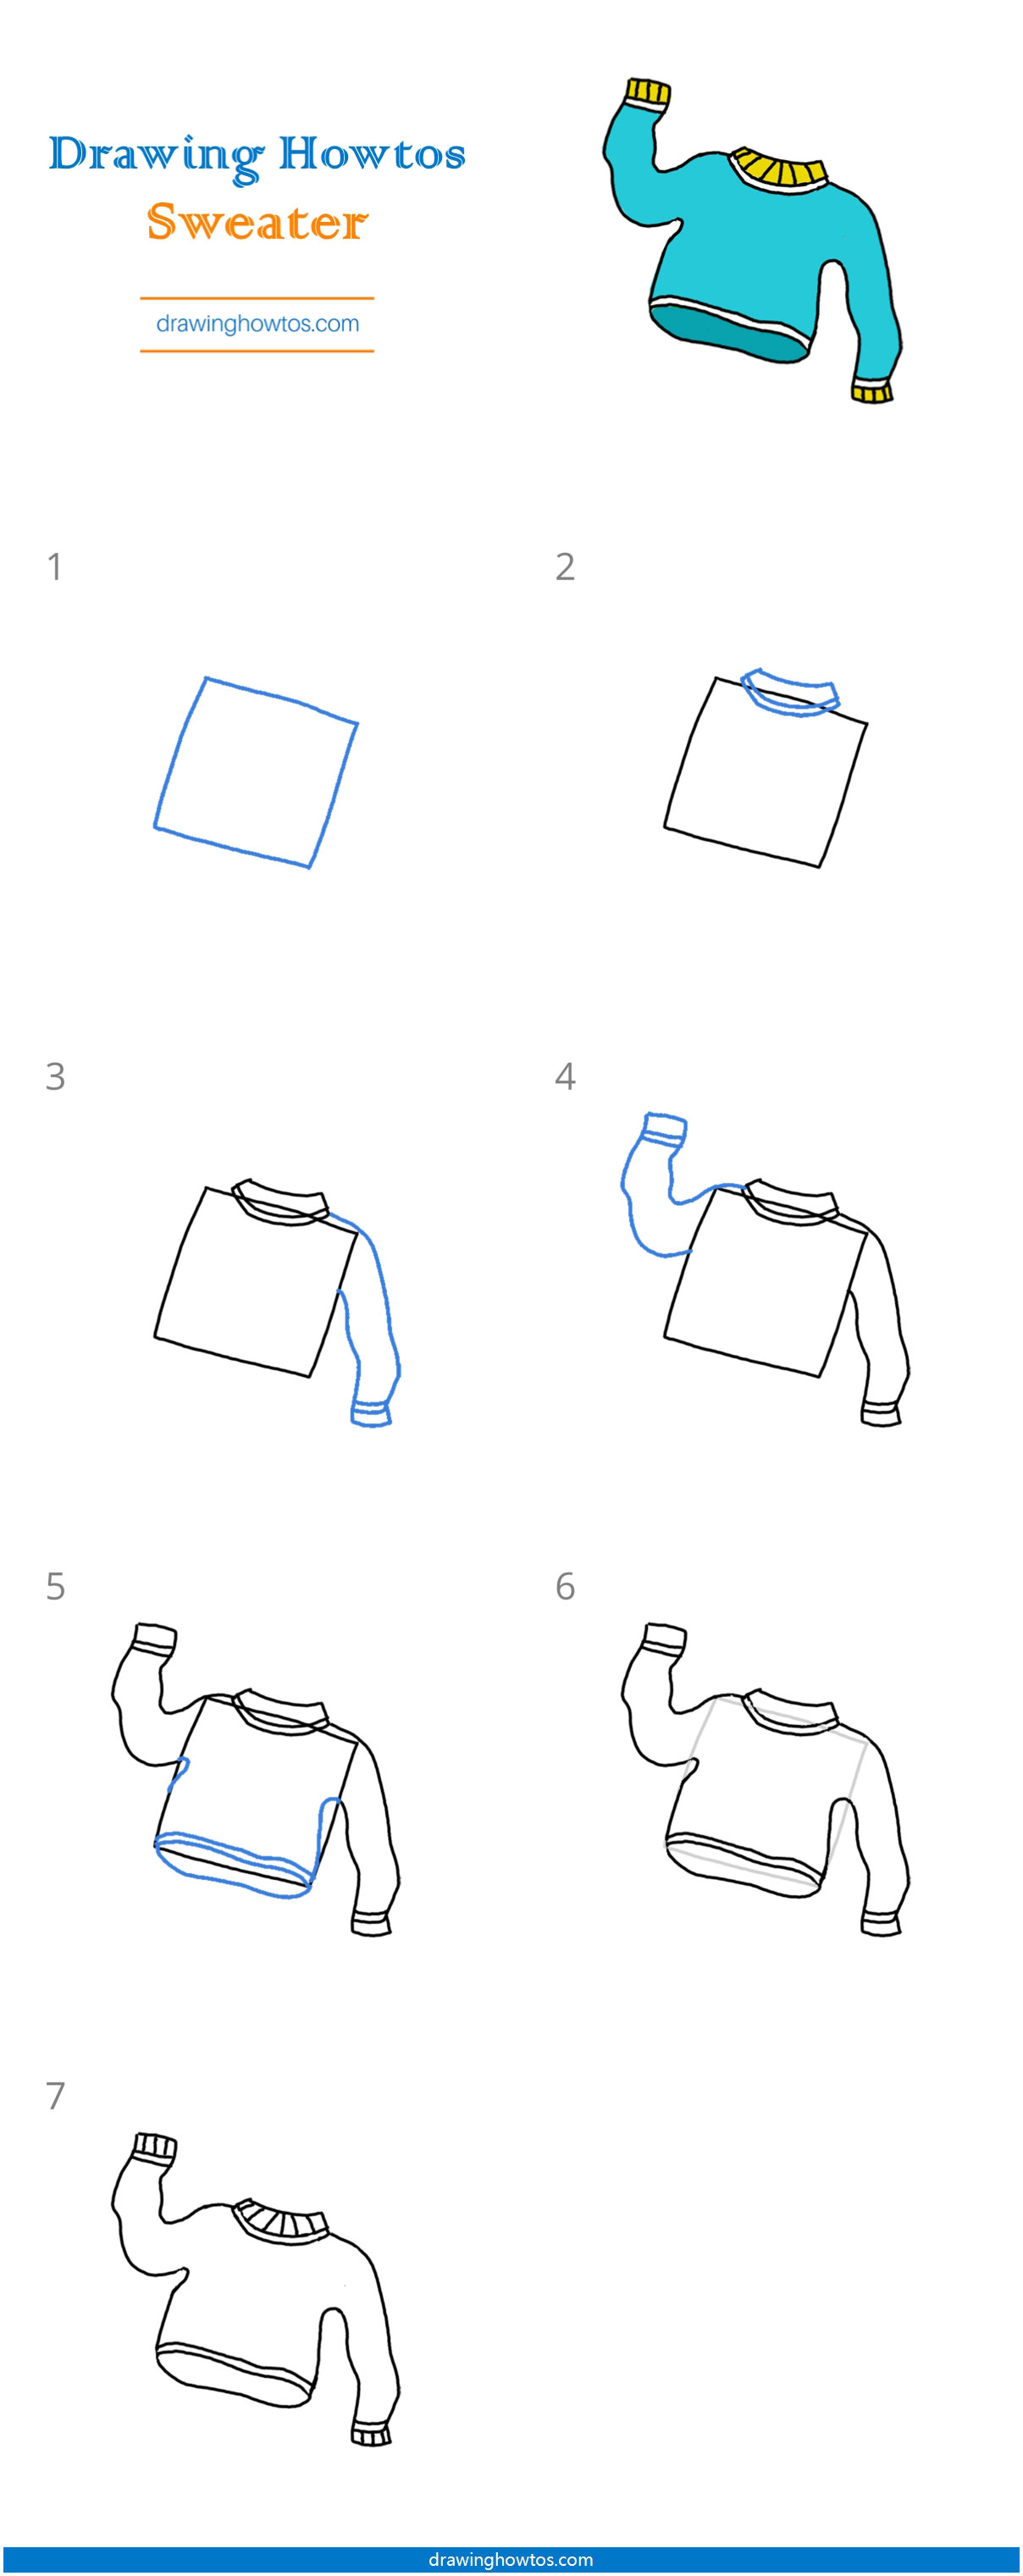 How to Draw a Sweater Step by Step